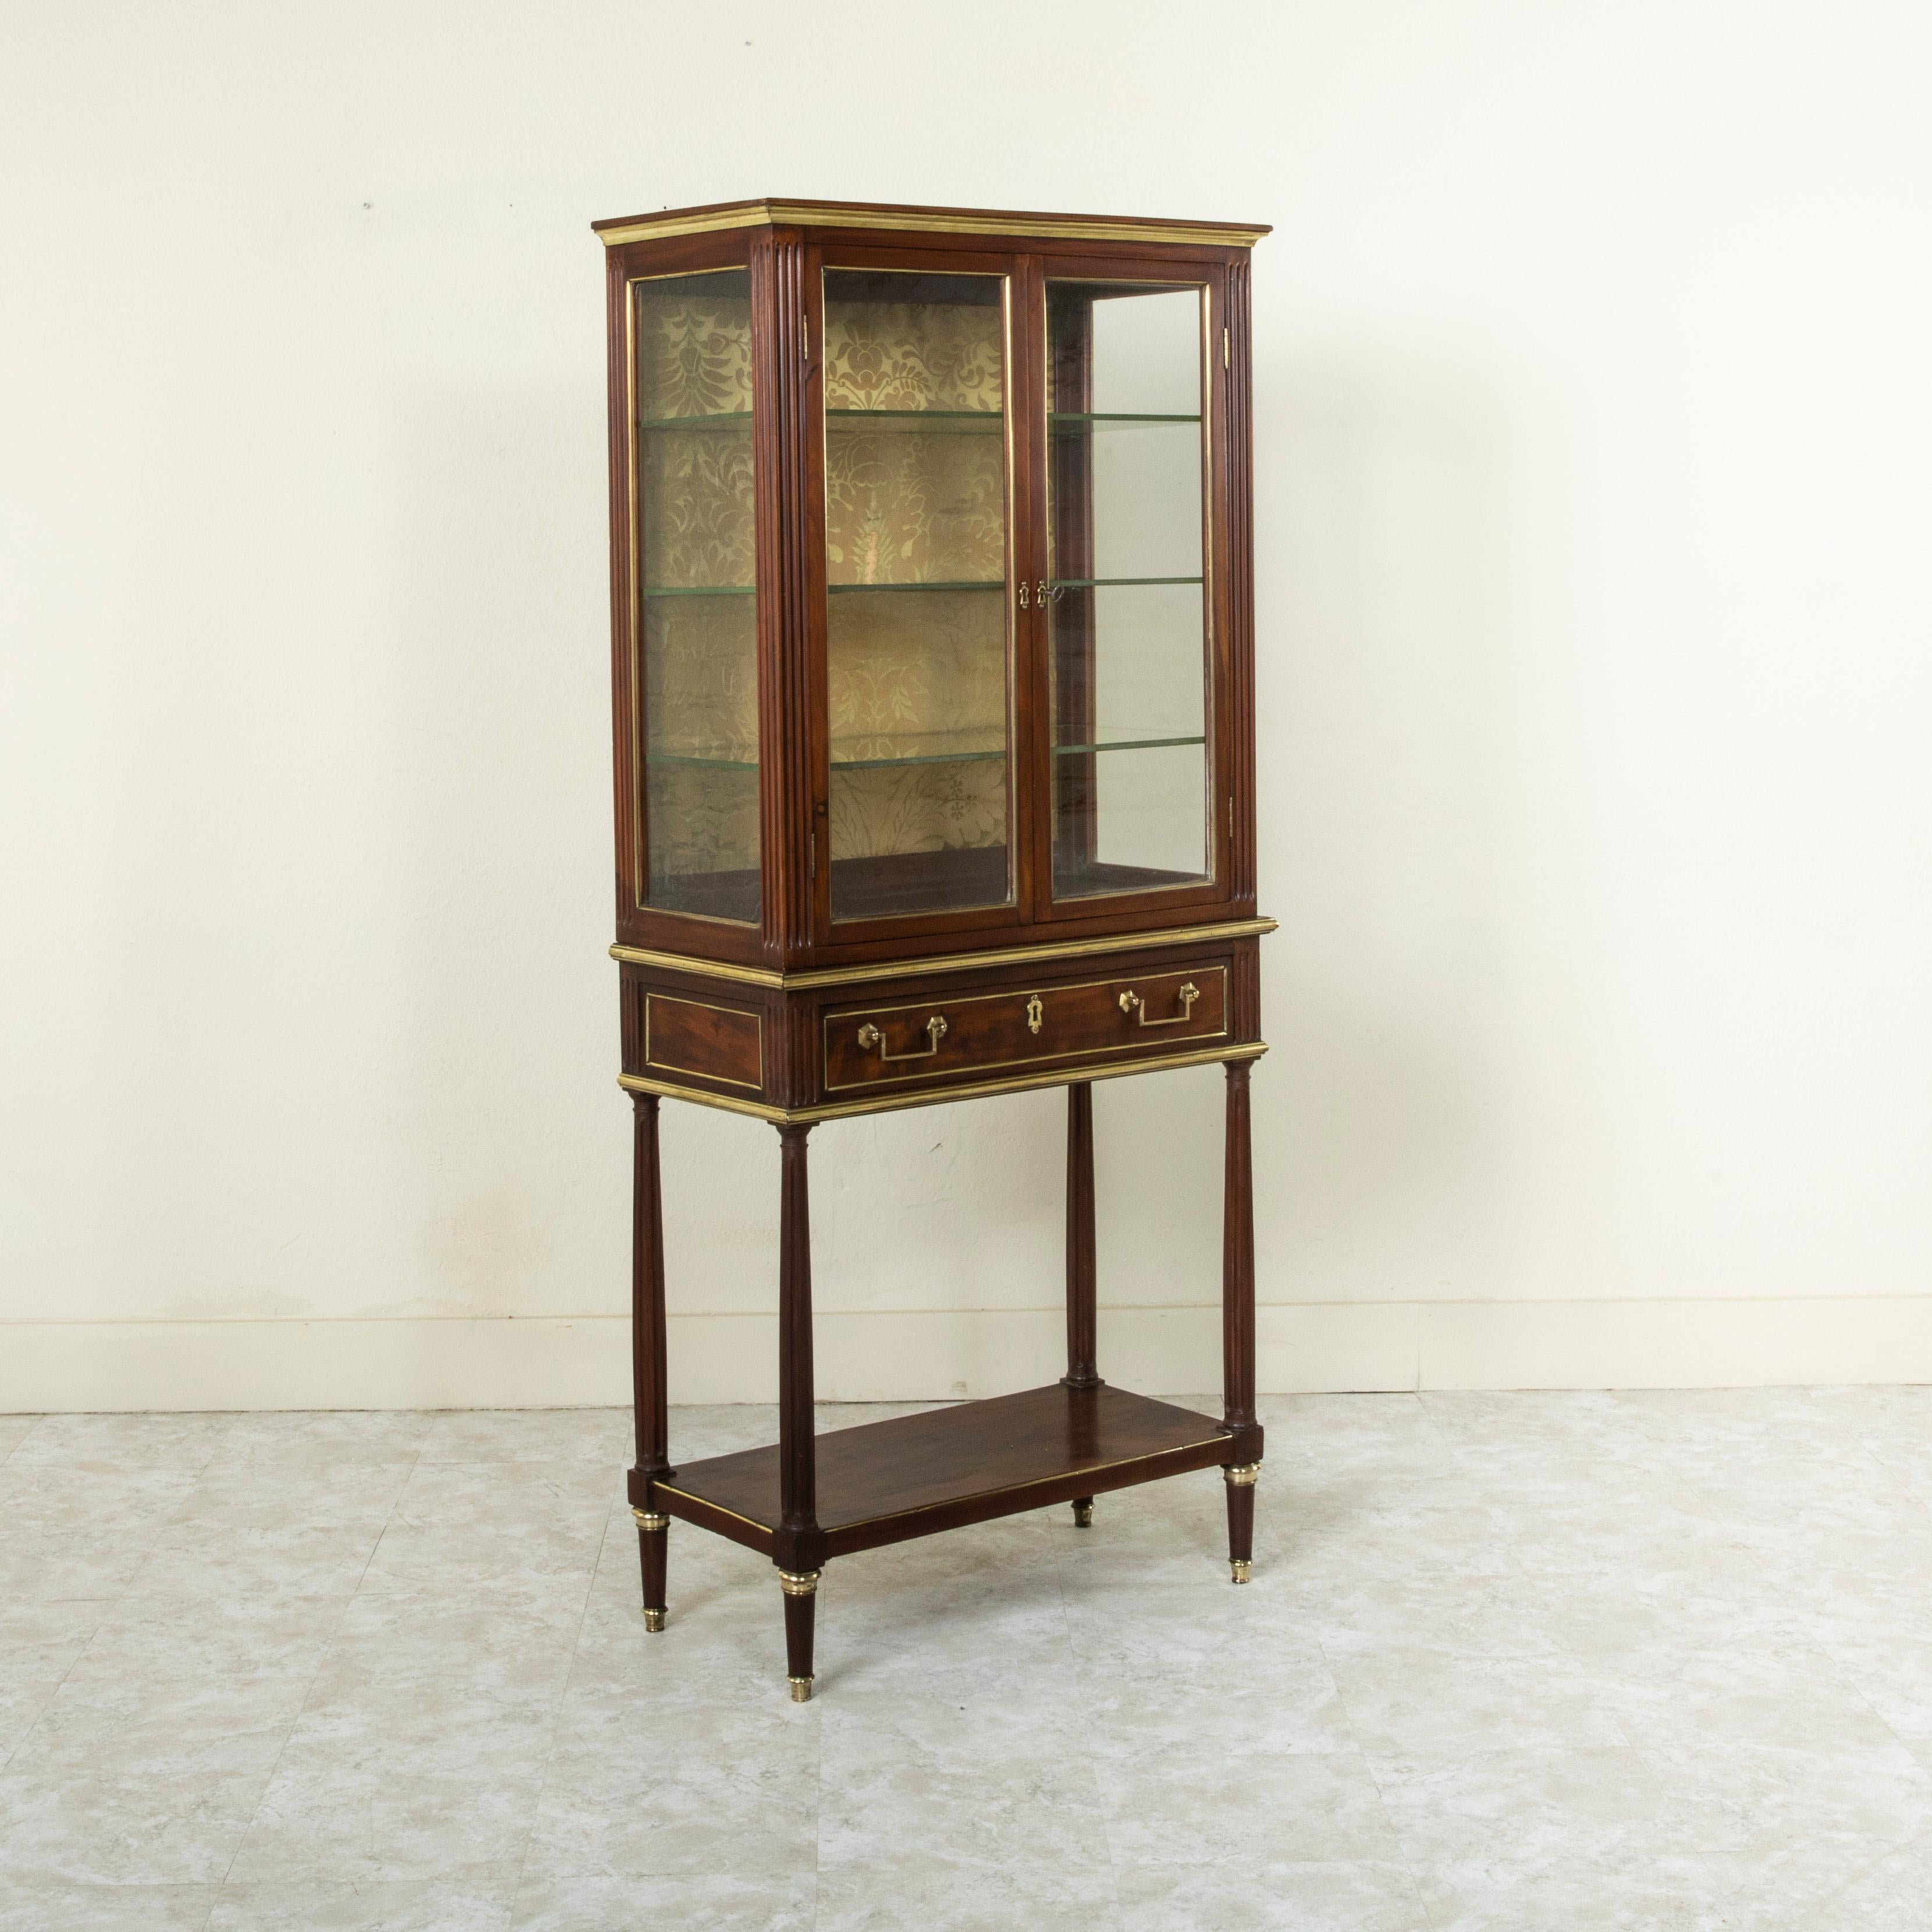 This mid nineteenth century French Louis XVI style mahogany console vitrine features fluted corners and bronze banding on its facade and sides. The upper cabinet is finished with glass on three sides and its two doors open to access its fabric lined